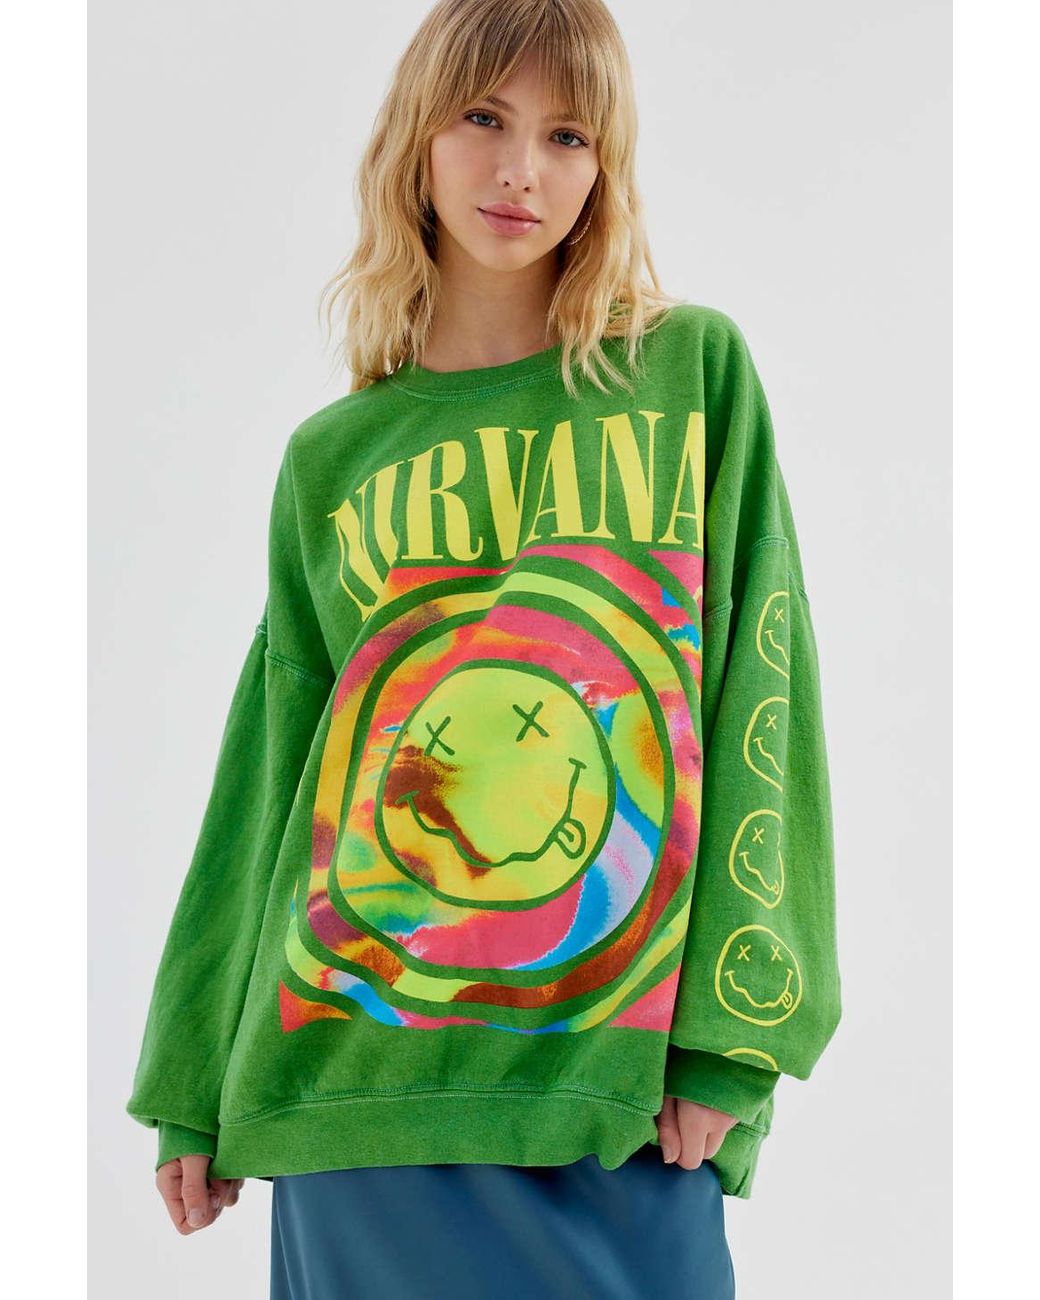 Urban Outfitters Nirvana Smile Overdyed Sweatshirt in Green | Lyst